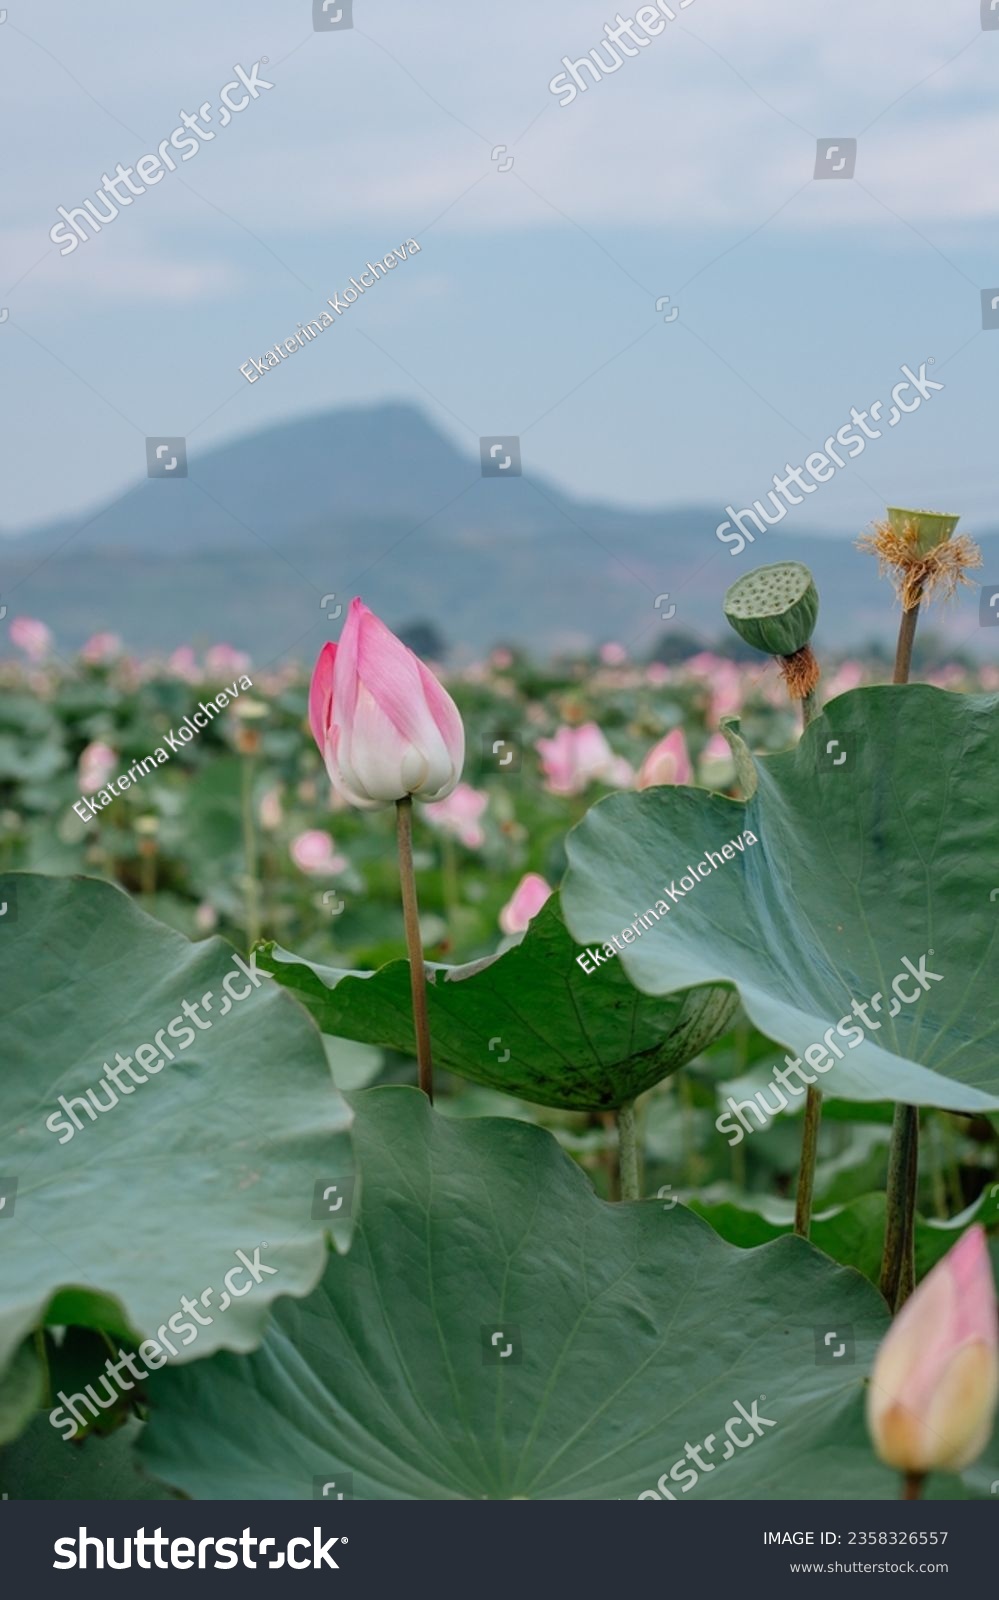 Lotus field, mountains in the background. Vietnam. Growing lotuses for cooking, ethnoscience, lotus tea
 #2358326557